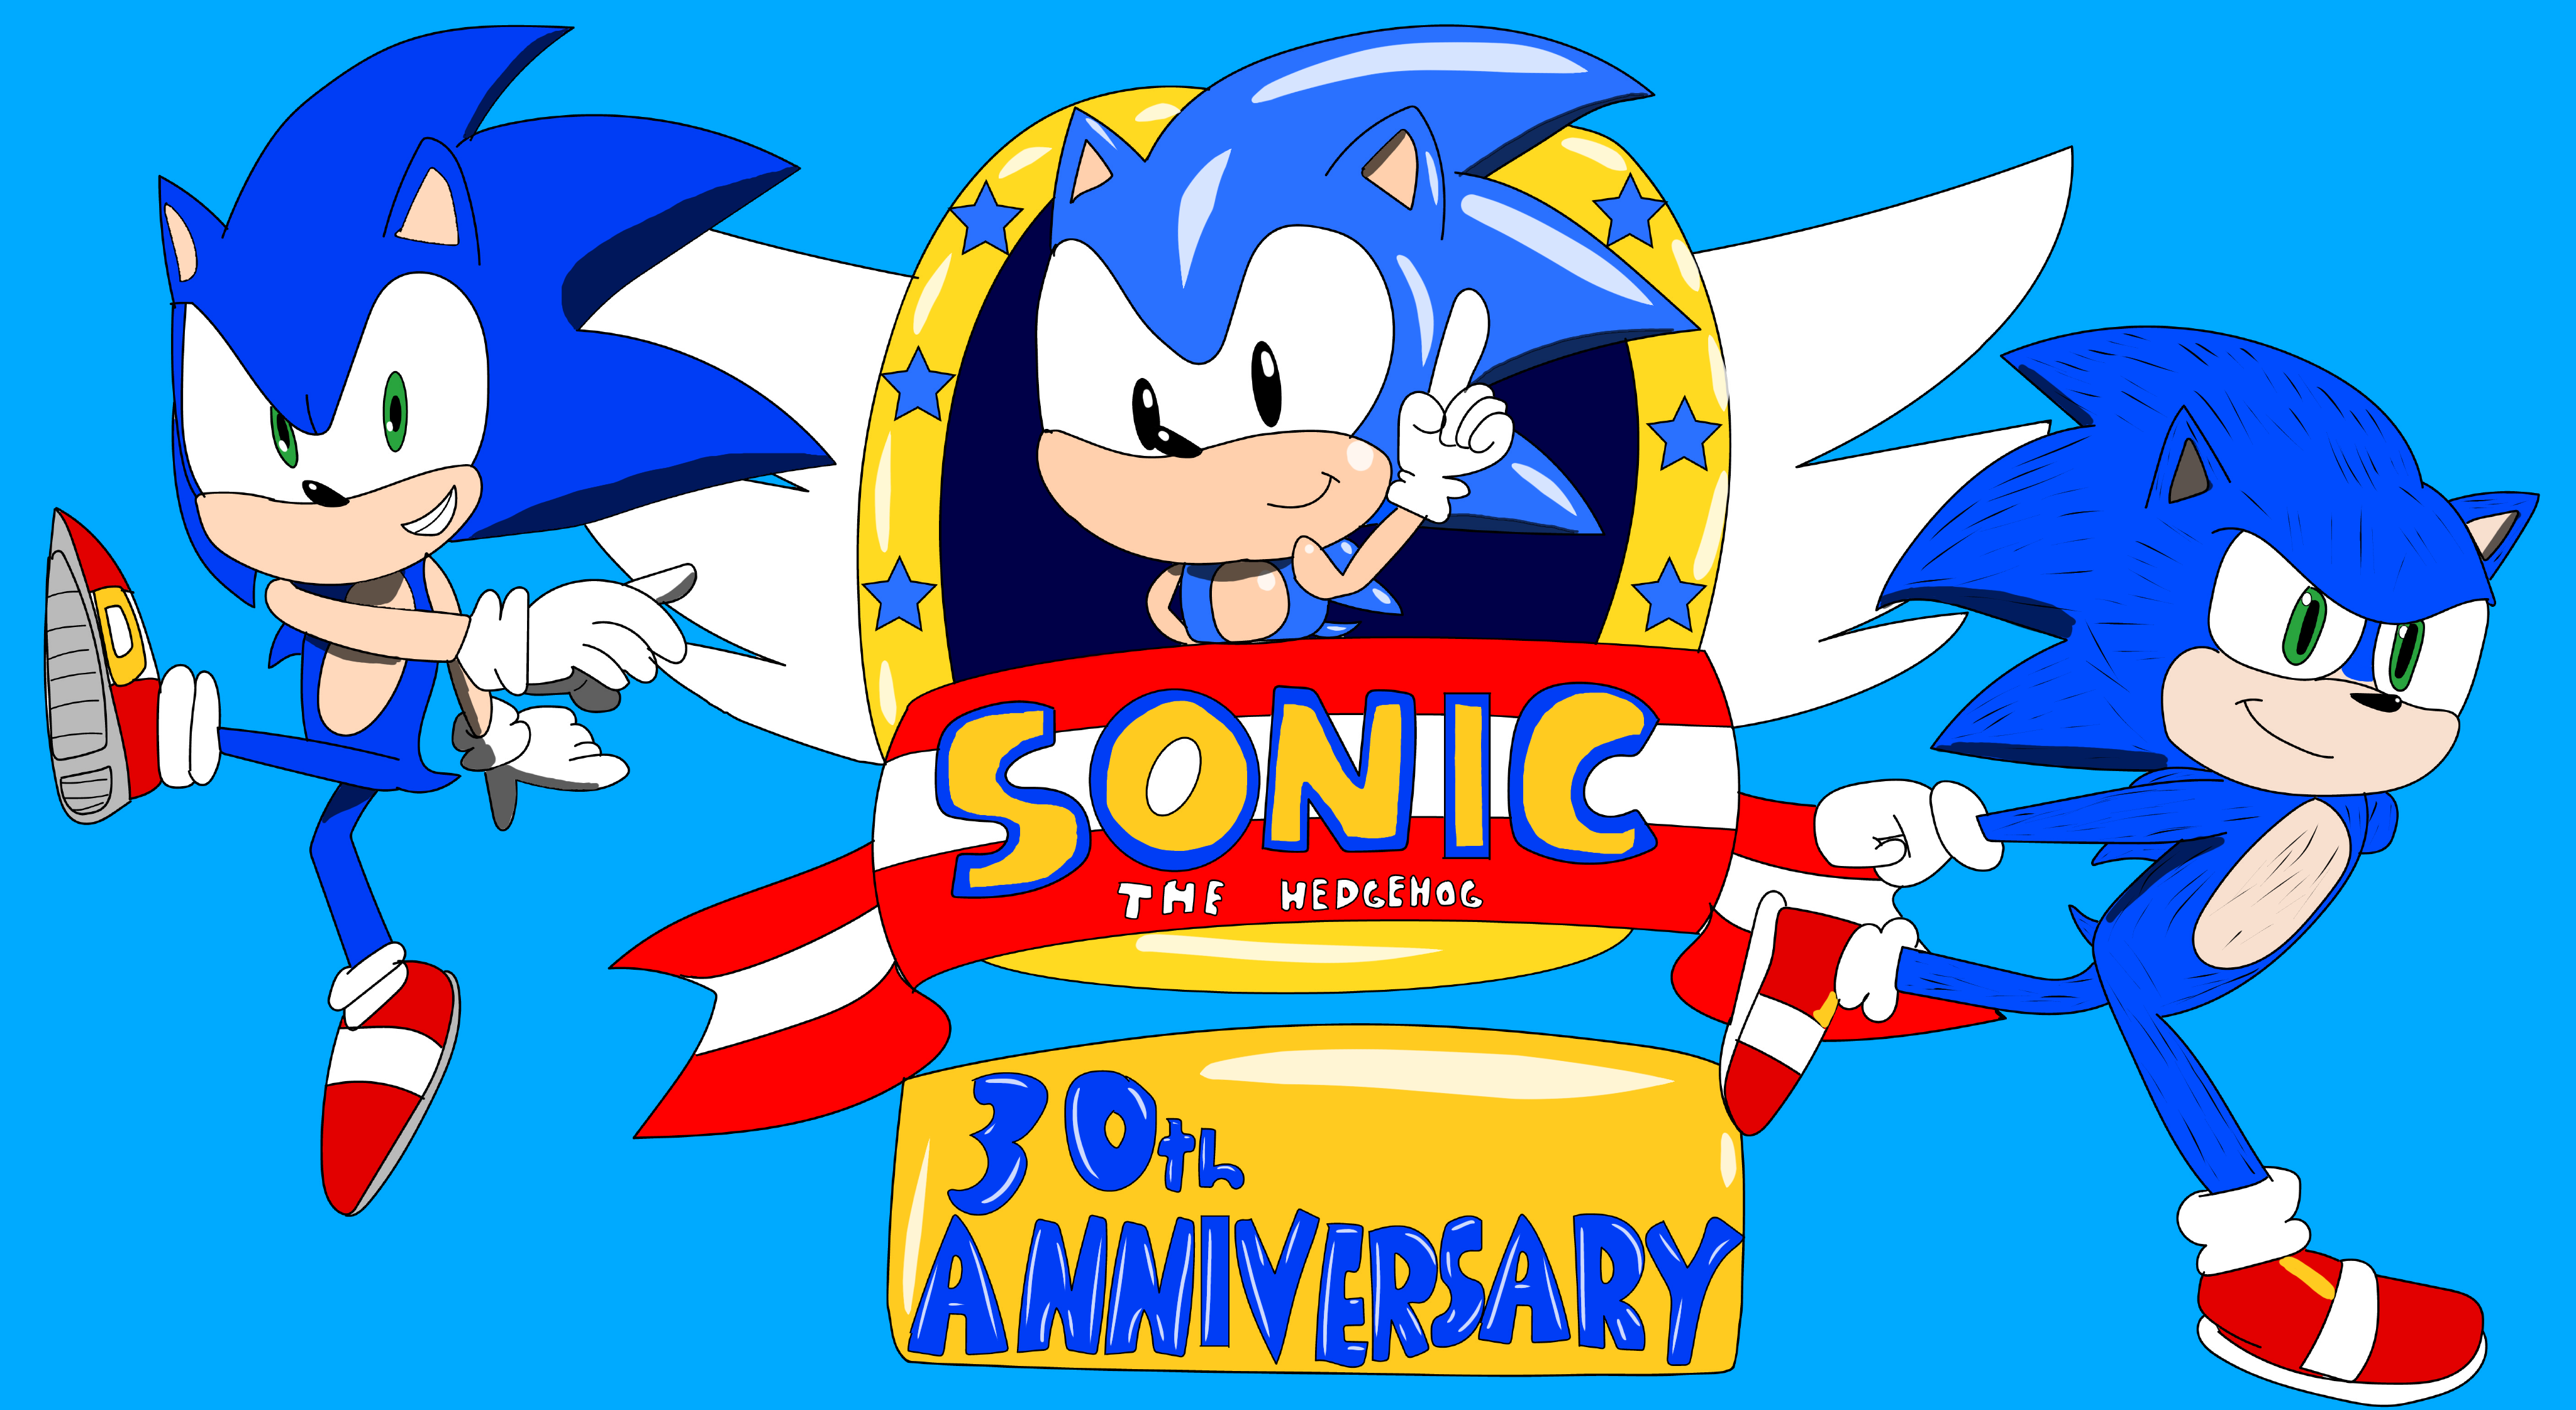 Sonic The Hedgehog 2 30th Logo by Bilico86 on DeviantArt